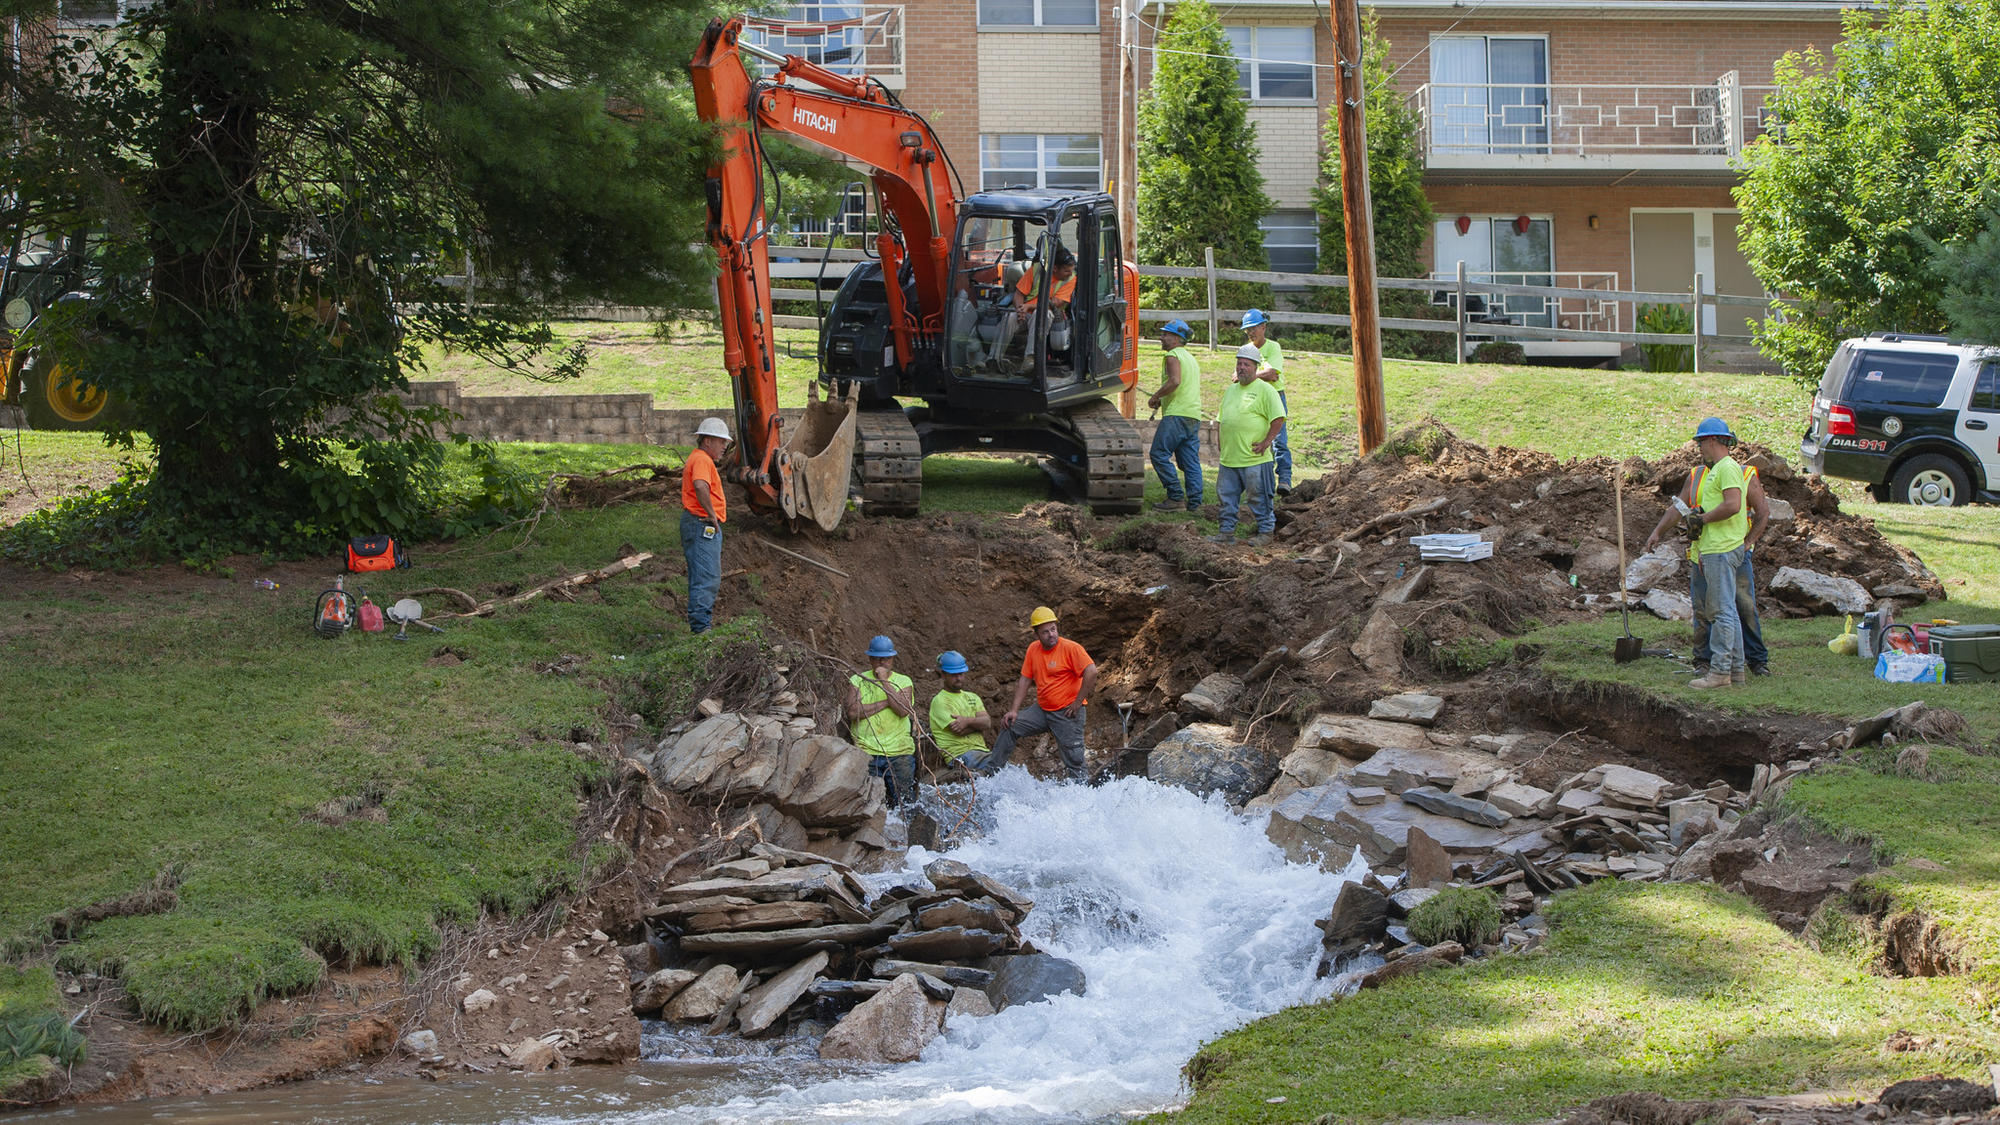 thanks-to-a-water-main-break-easton-becomes-latest-place-to-close-a